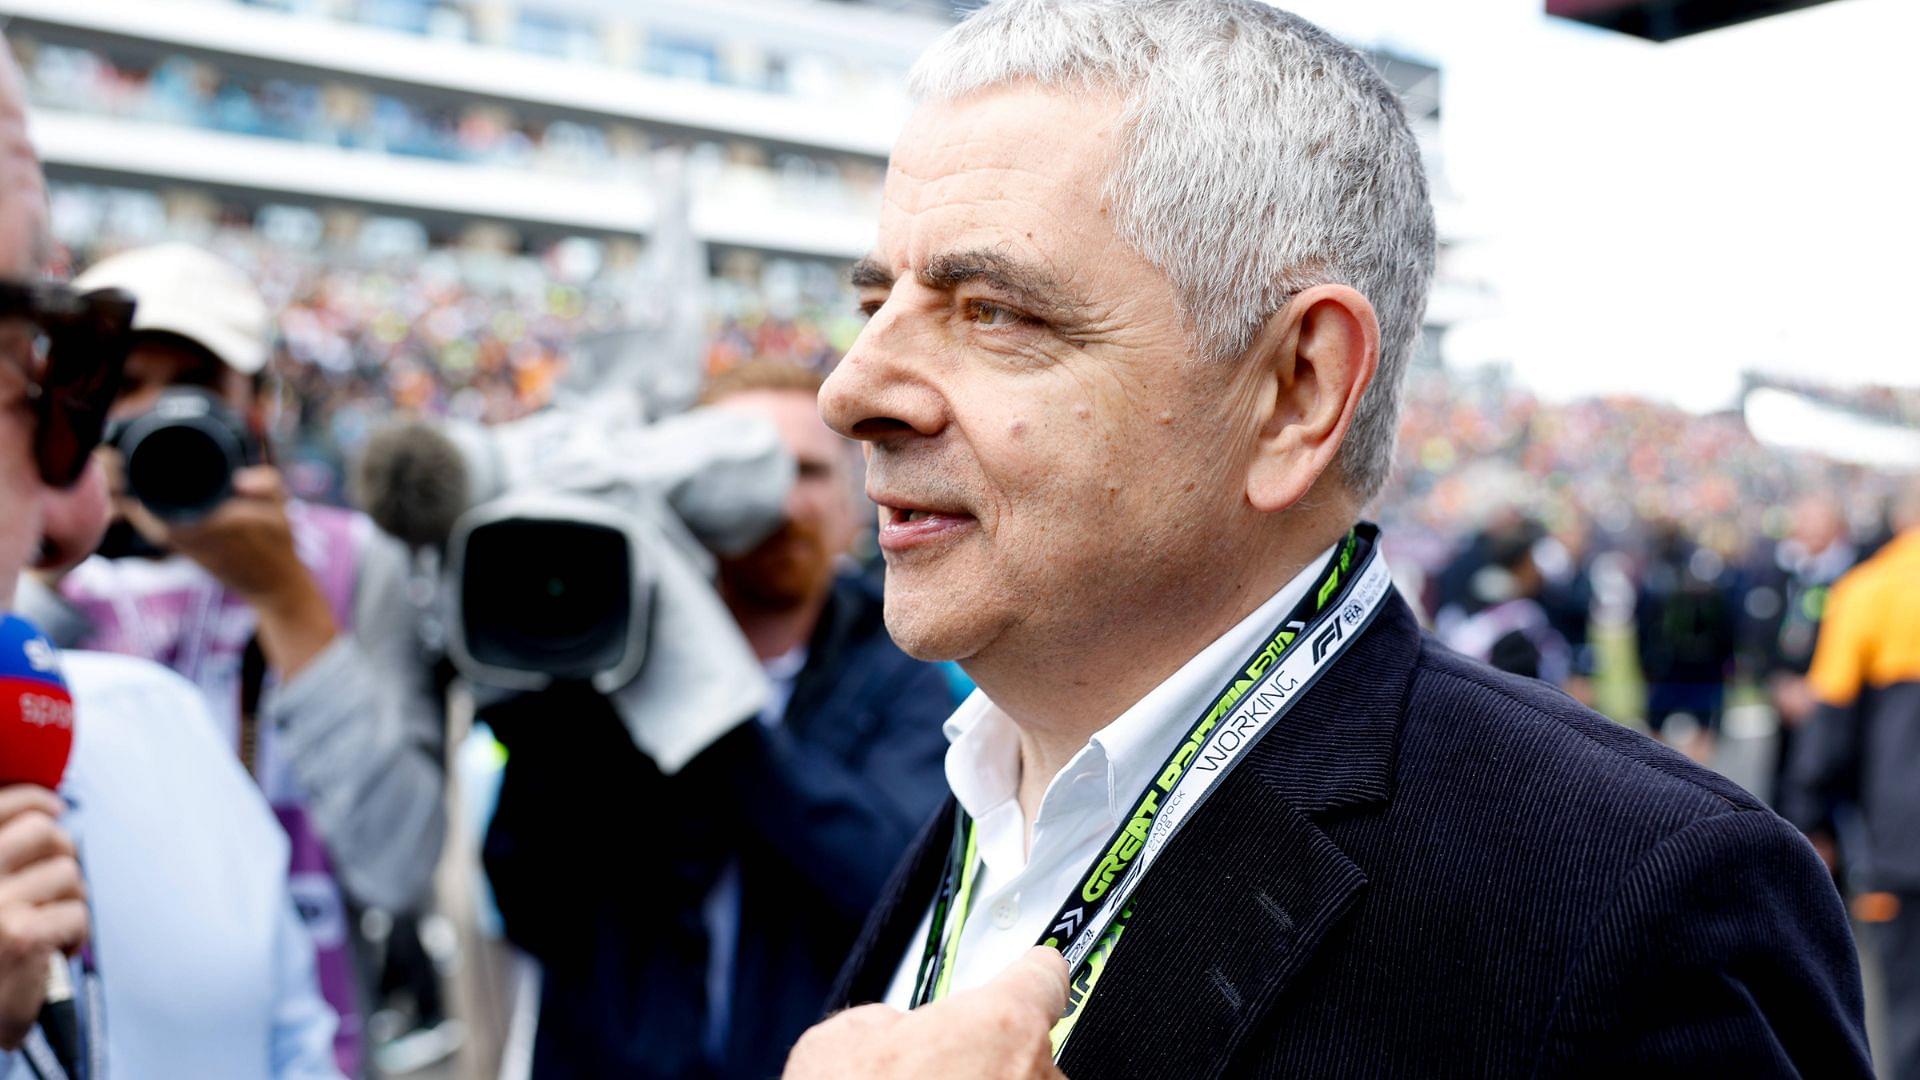 Happened Twice in 13 Years, Yet Martin Brundle Never Figured Out Rowan Atkinson’s Shenanigans